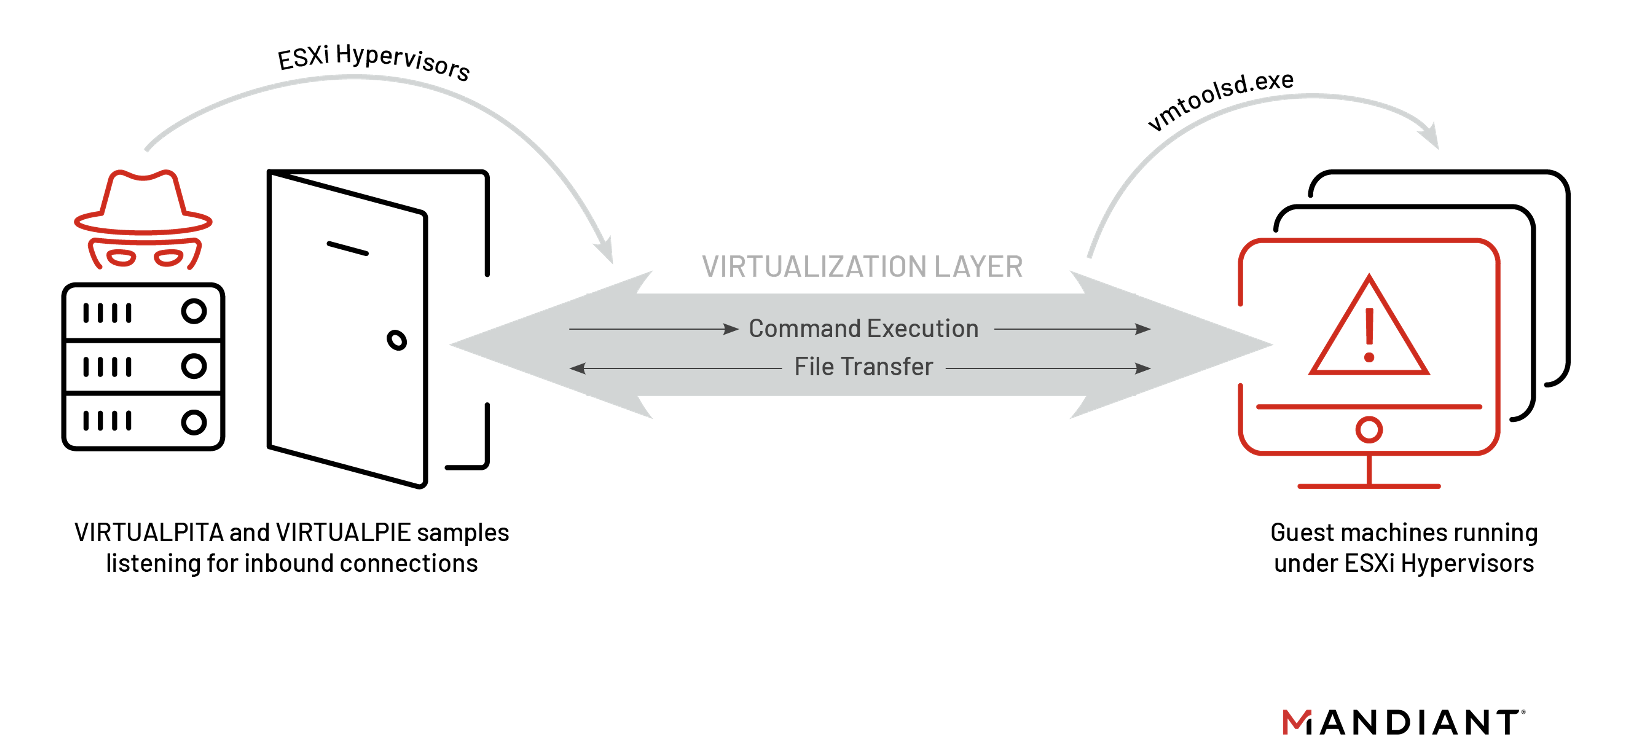 Attackers target hypervisors of virtual platforms to avoid EDR and maintain persistence